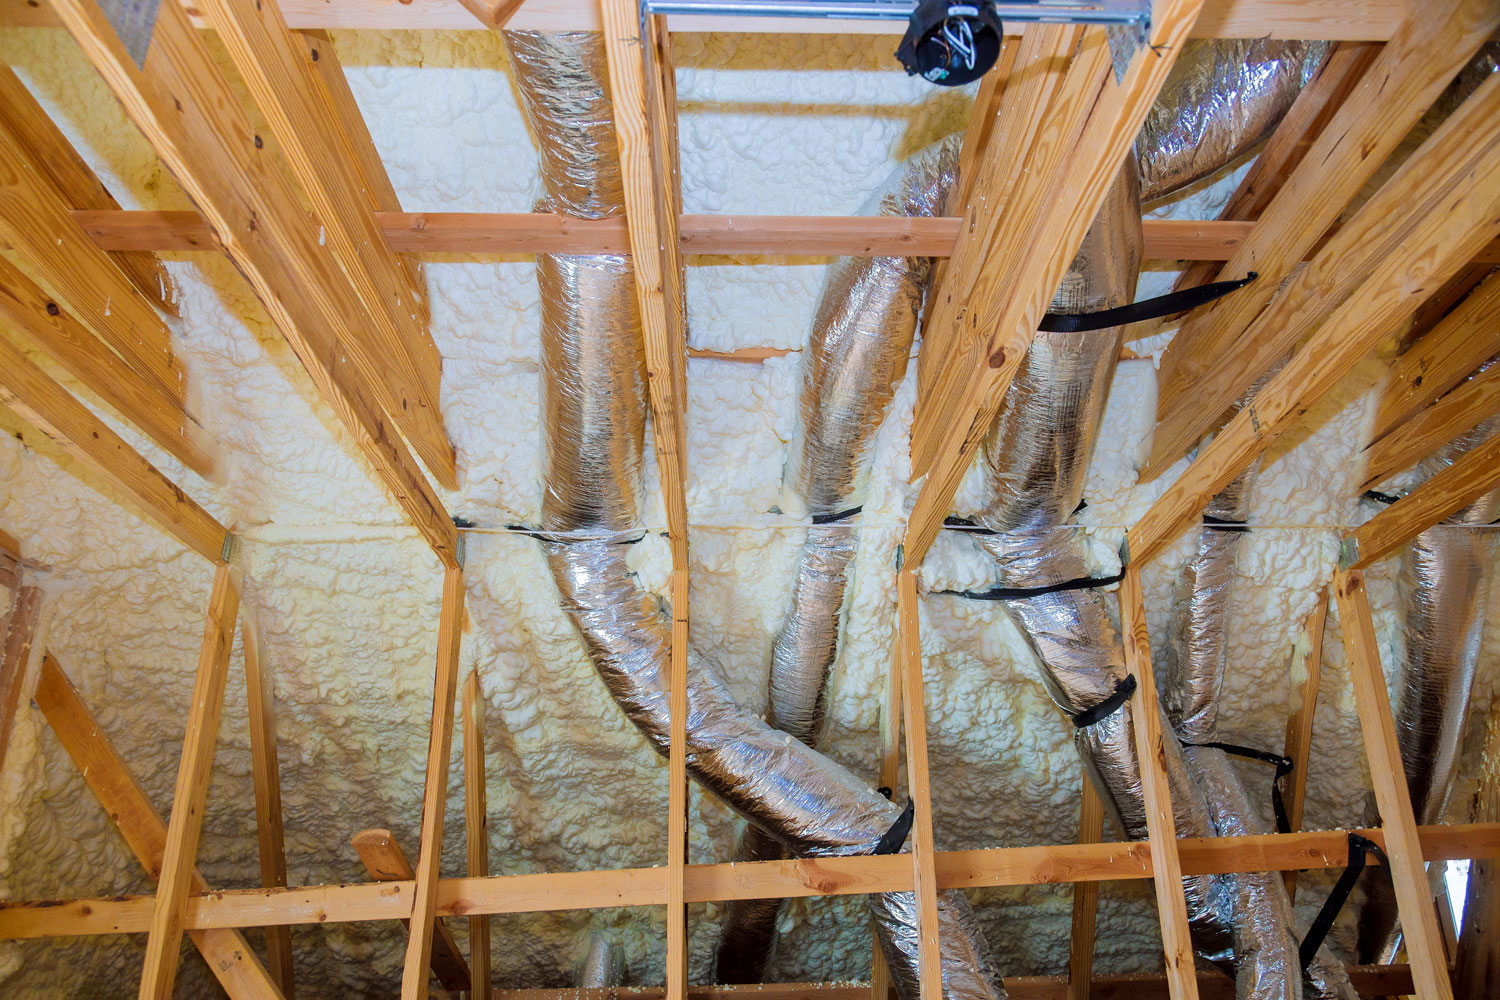 Insulation foam on the attic ceiling and ducting's for ventilation